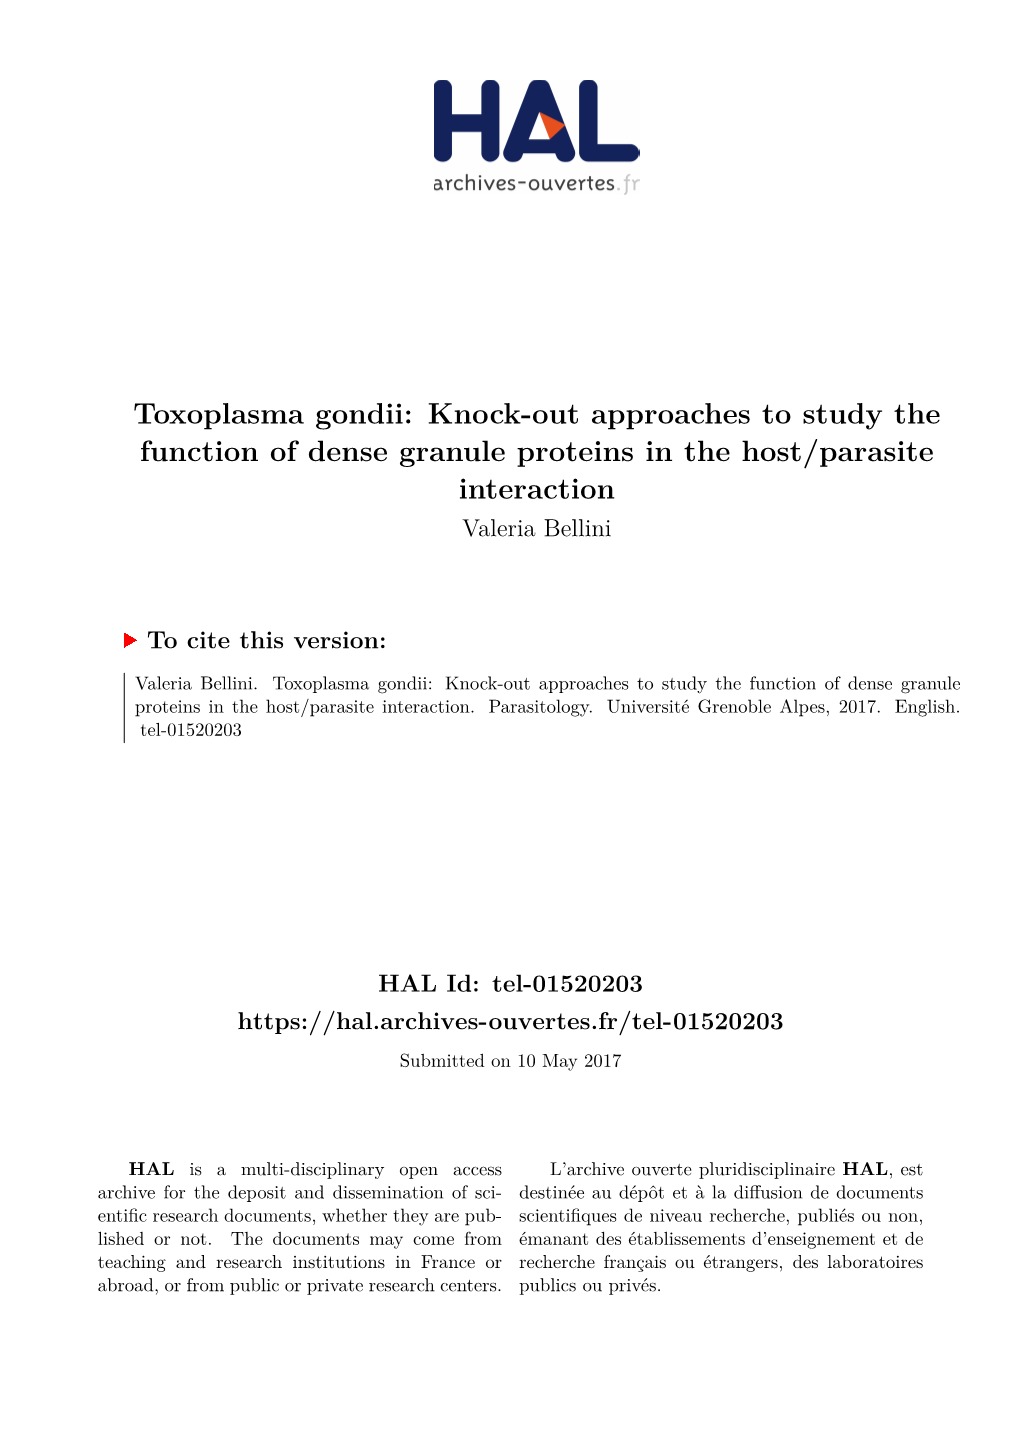 Toxoplasma Gondii: Knock-Out Approaches to Study the Function of Dense Granule Proteins in the Host/Parasite Interaction Valeria Bellini